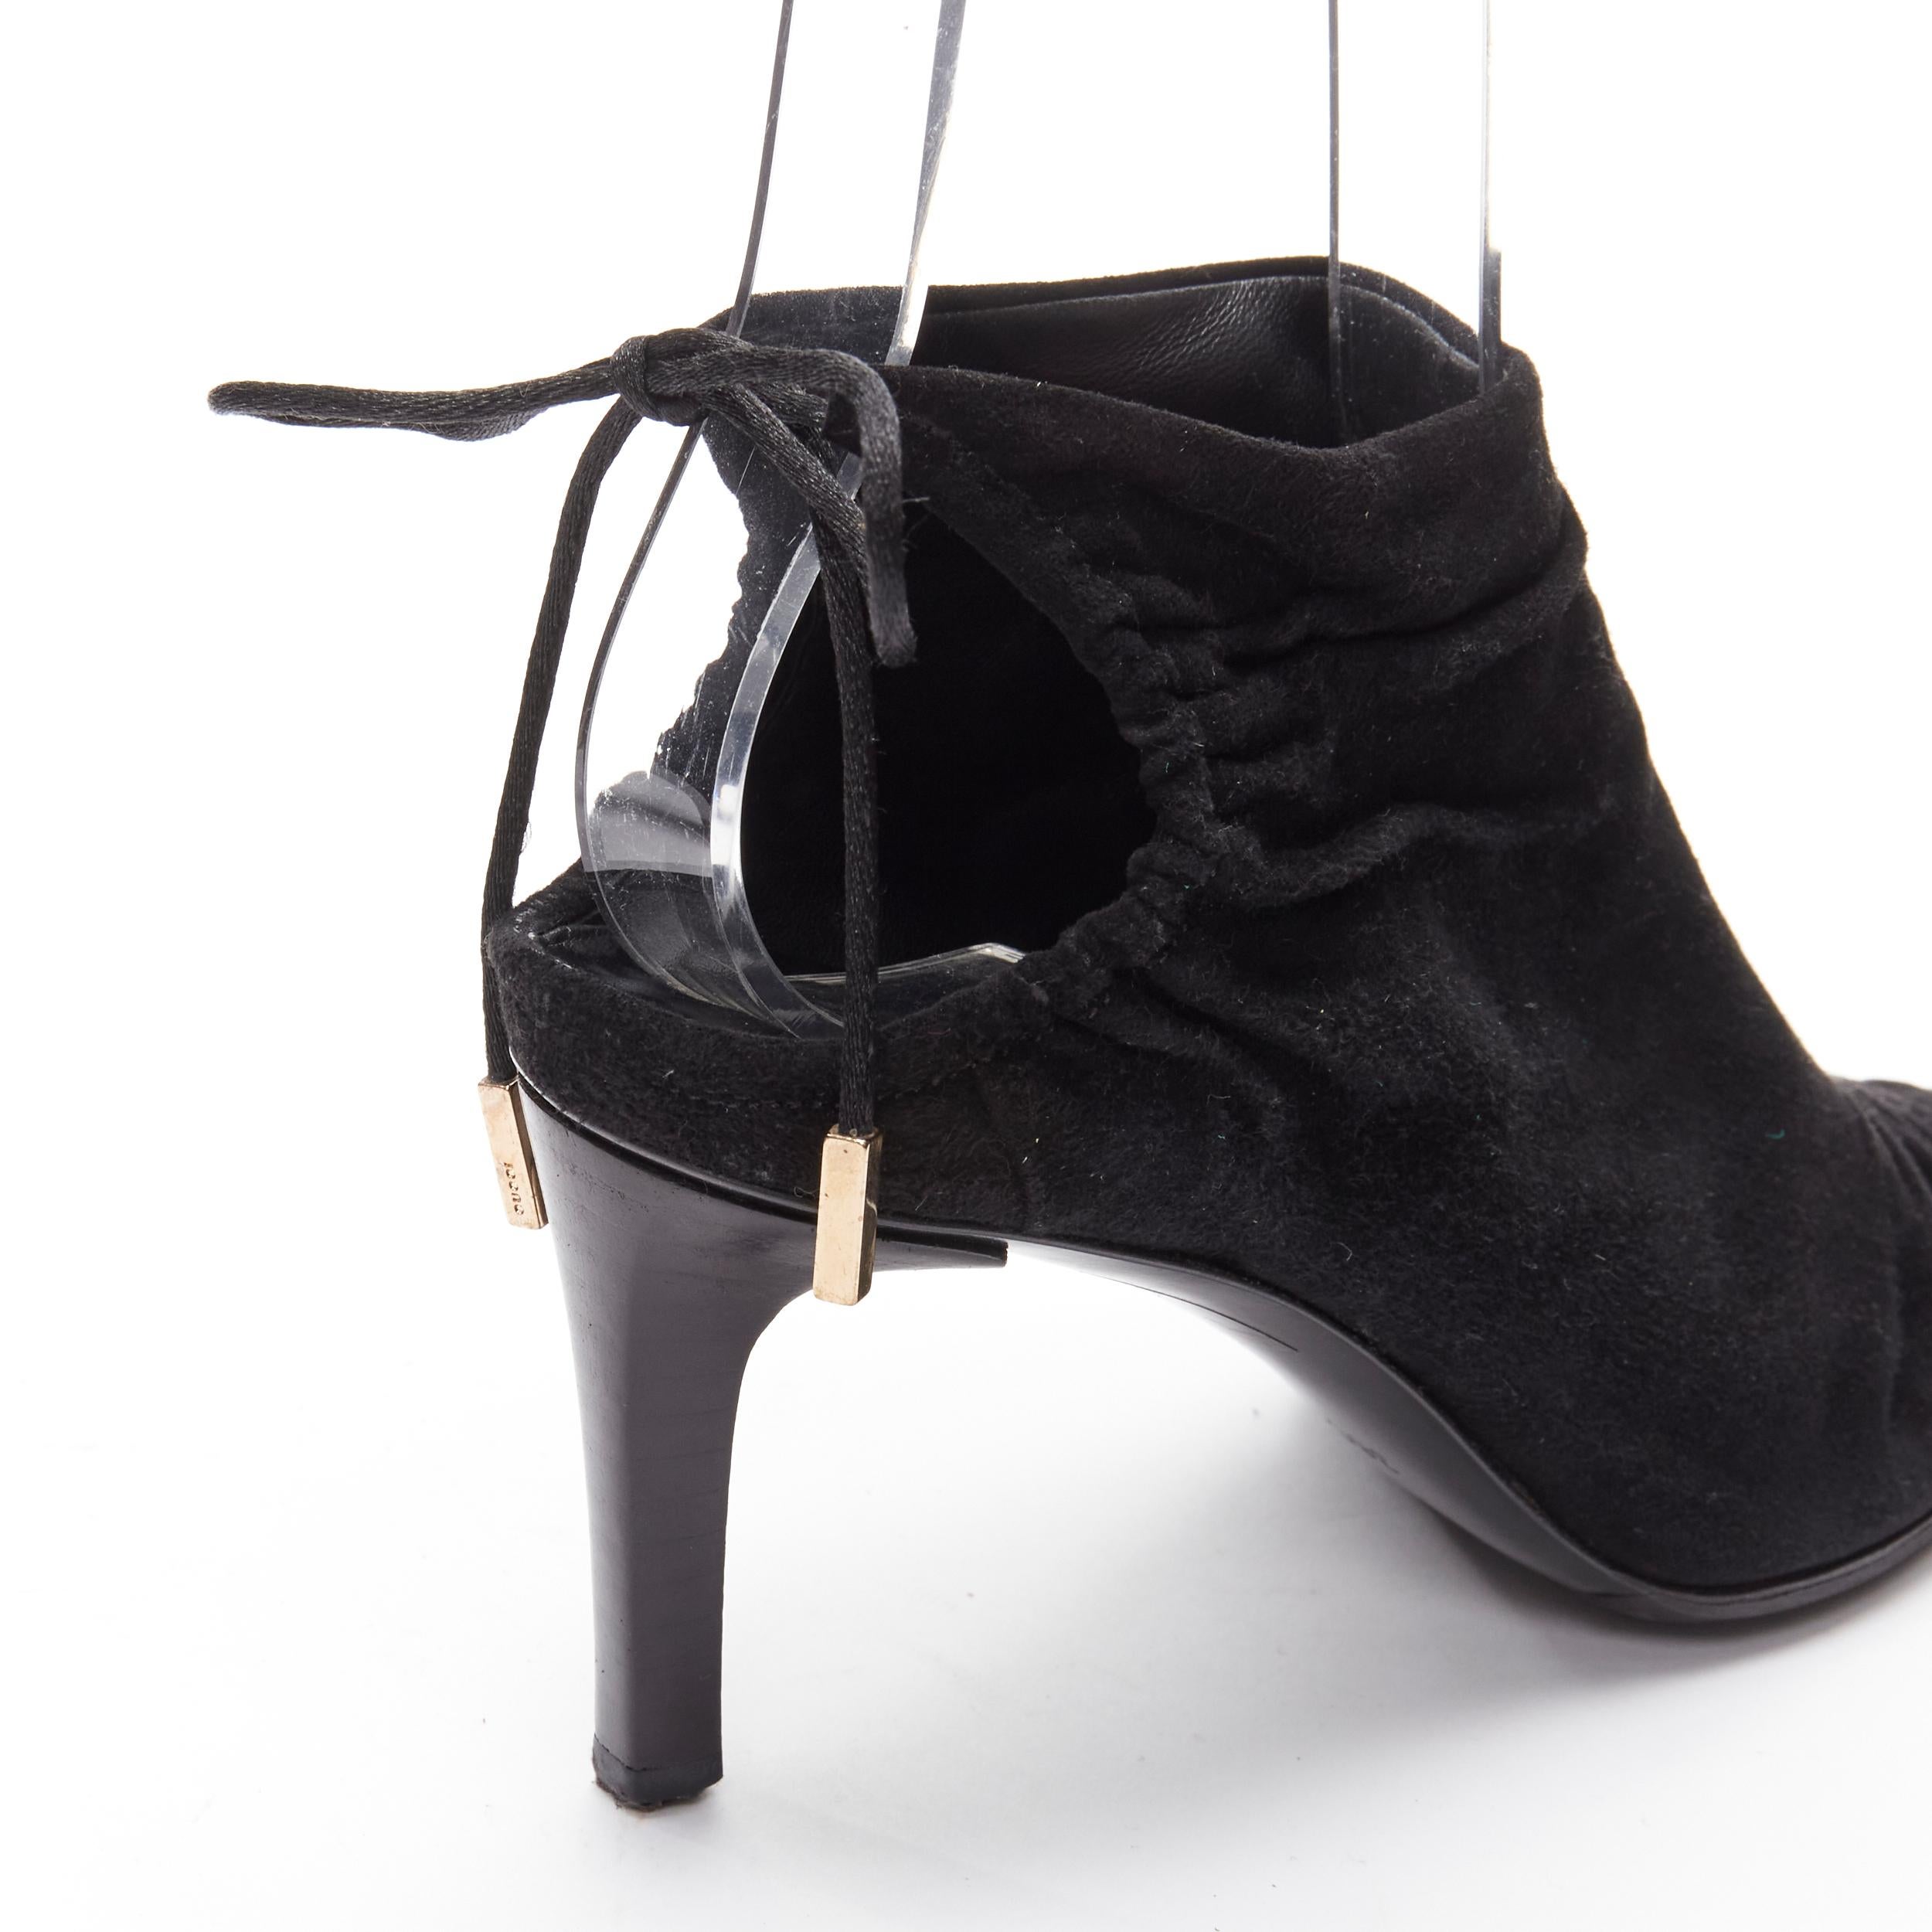 GUCCI Tom Ford Vintage black suede leather ruched toe tie back bootie EU36C
Reference: ANWU/A01051
Brand: Gucci
Designer: Tom Ford
Material: Suede
Color: Black
Pattern: Solid
Closure: Self Tie
Lining: Leather
Extra Details: Leather tie back with